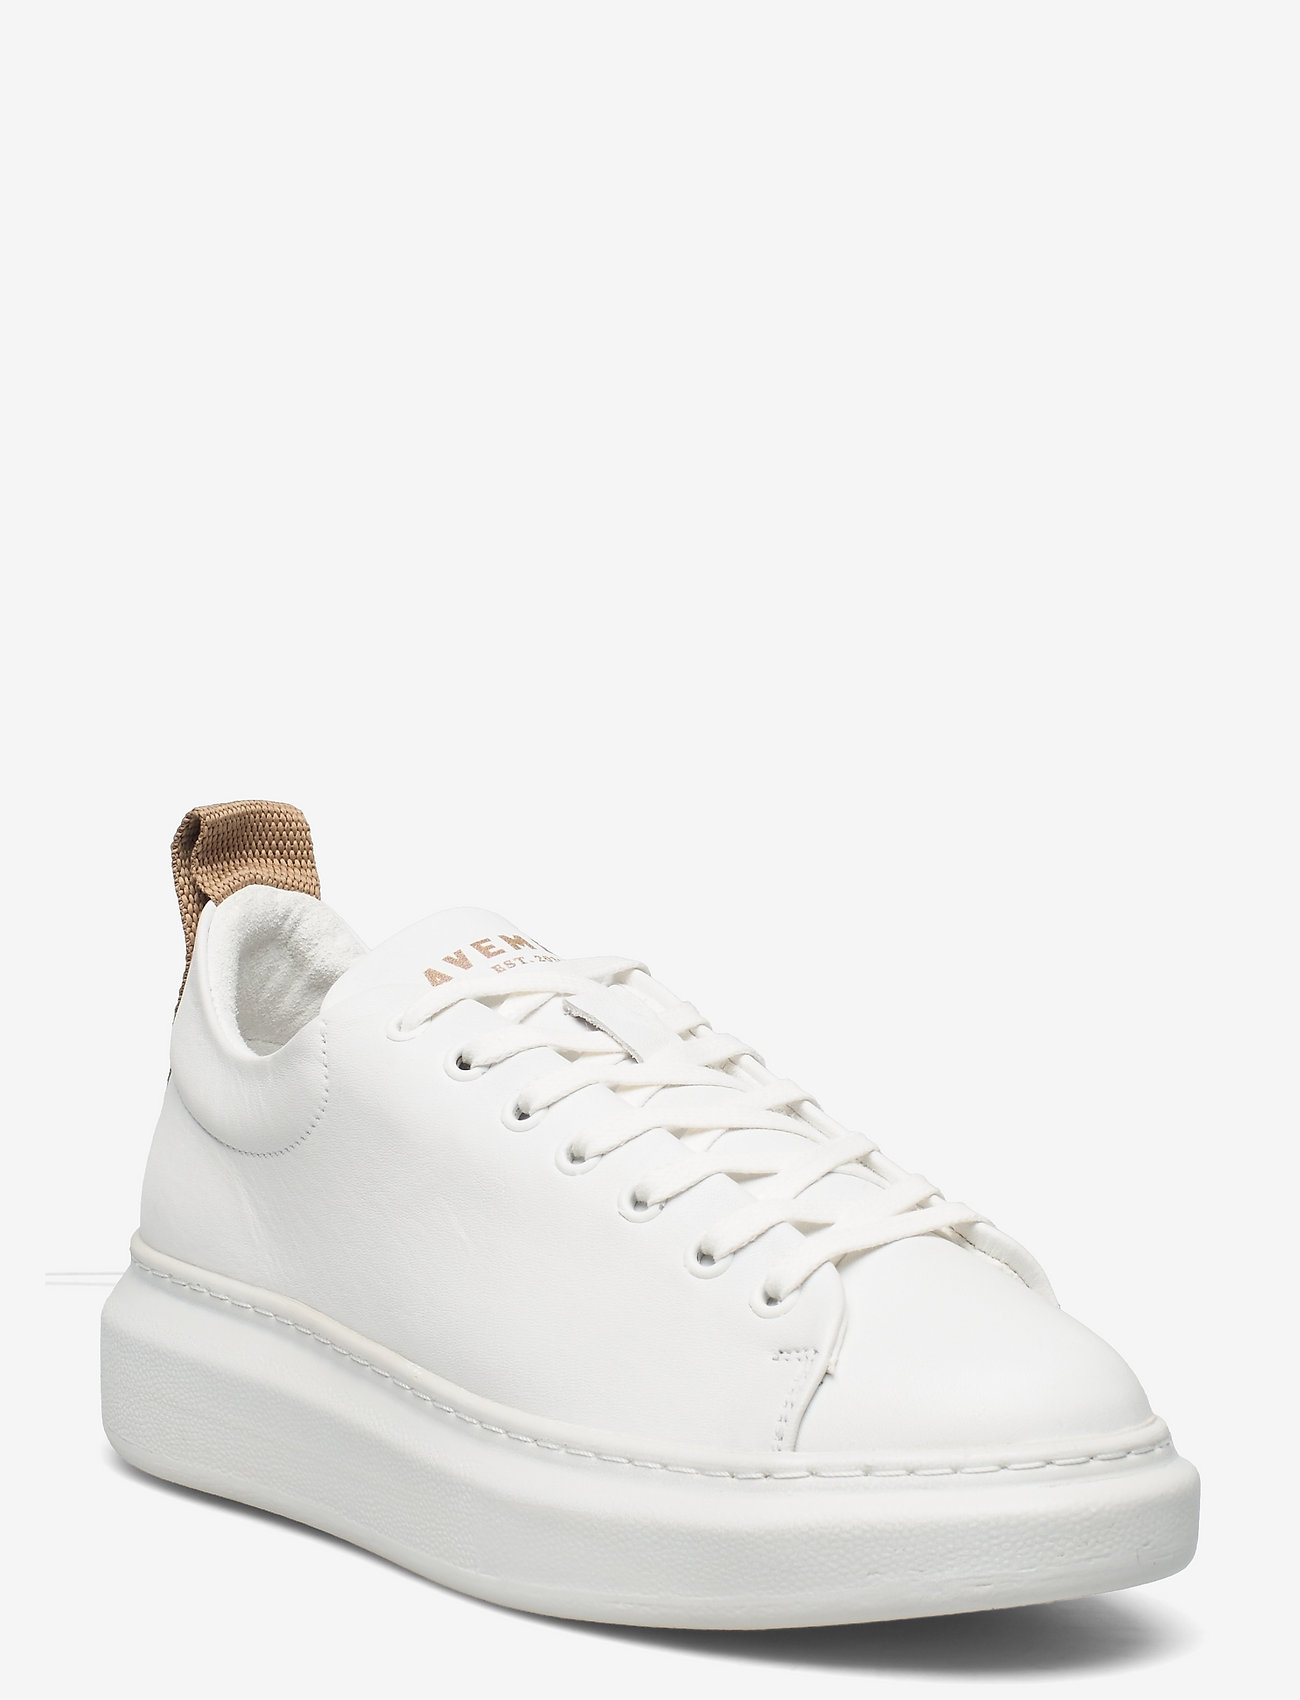 Pavement - Dee color - lave sneakers - white/beige - 0